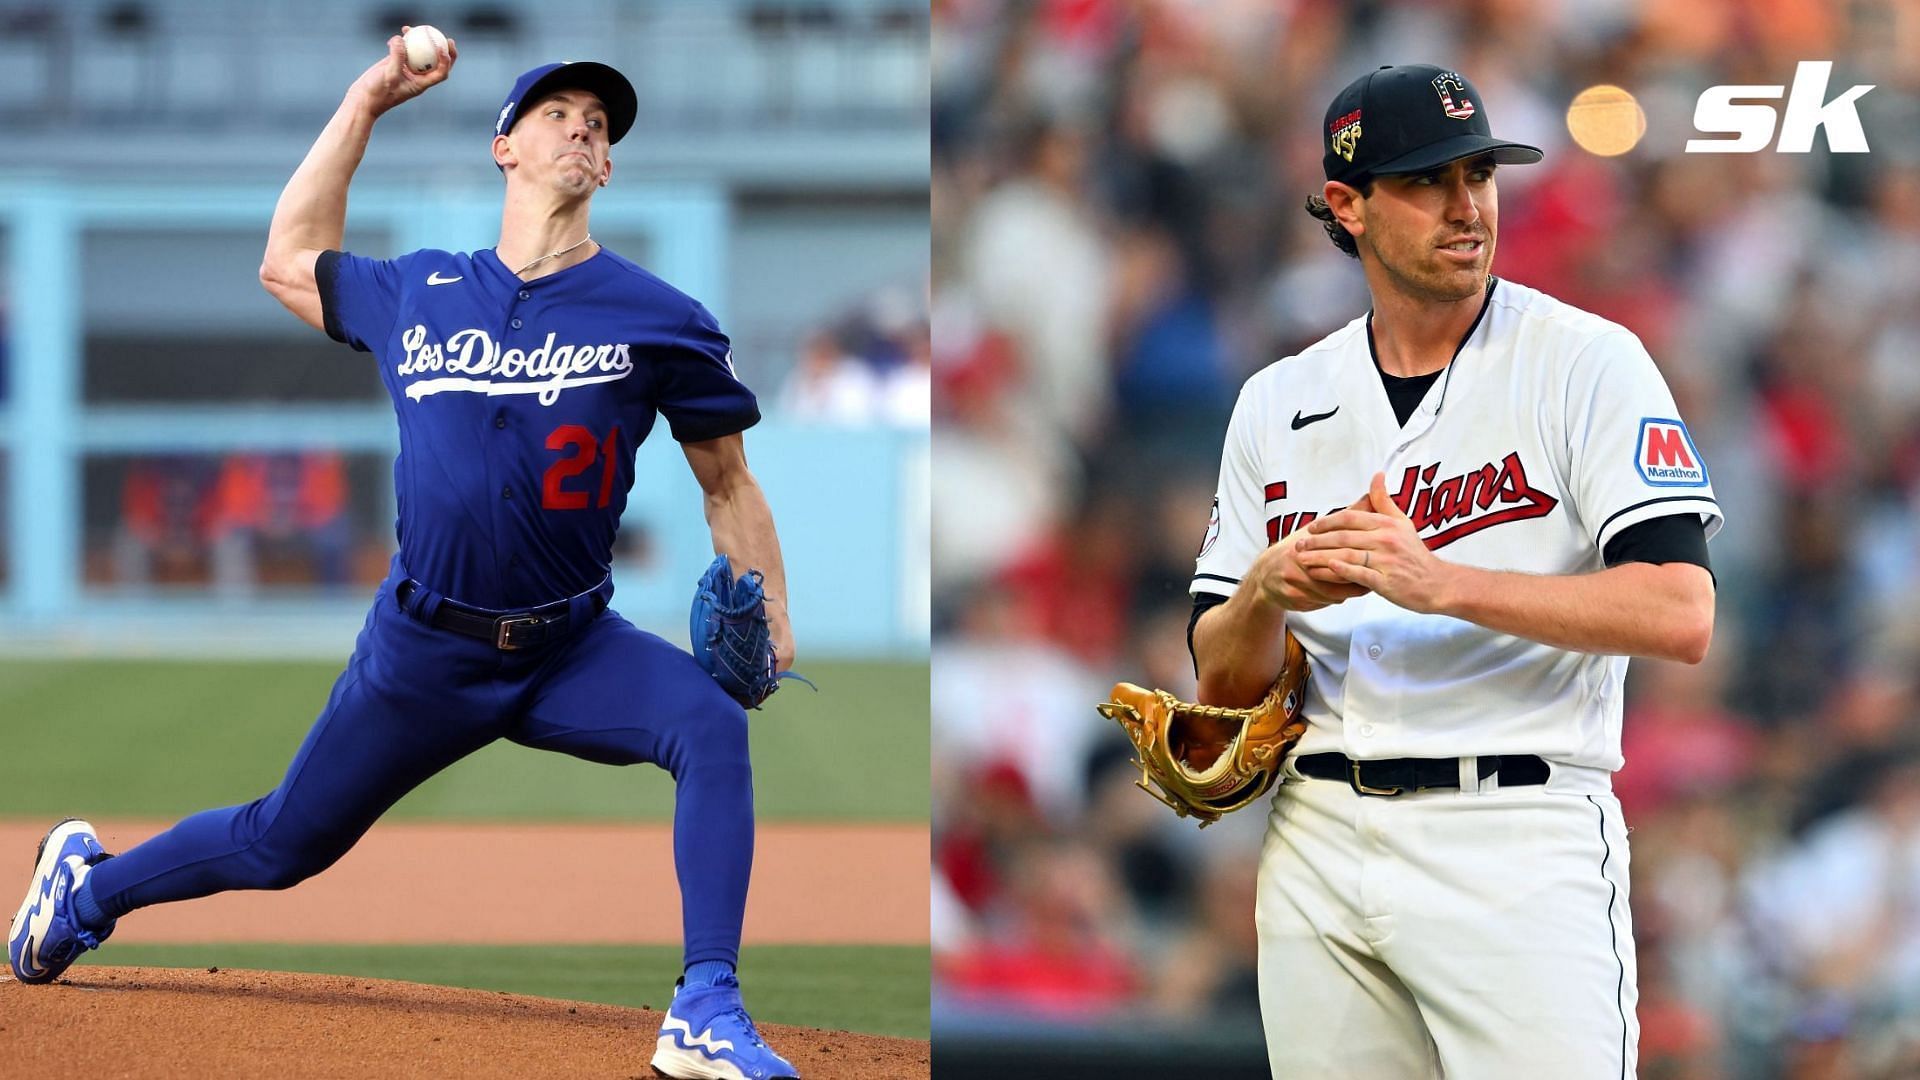 Shane Bieber and Walker Buehler were some of the players who will avoid arbitration after reaching contract agreements